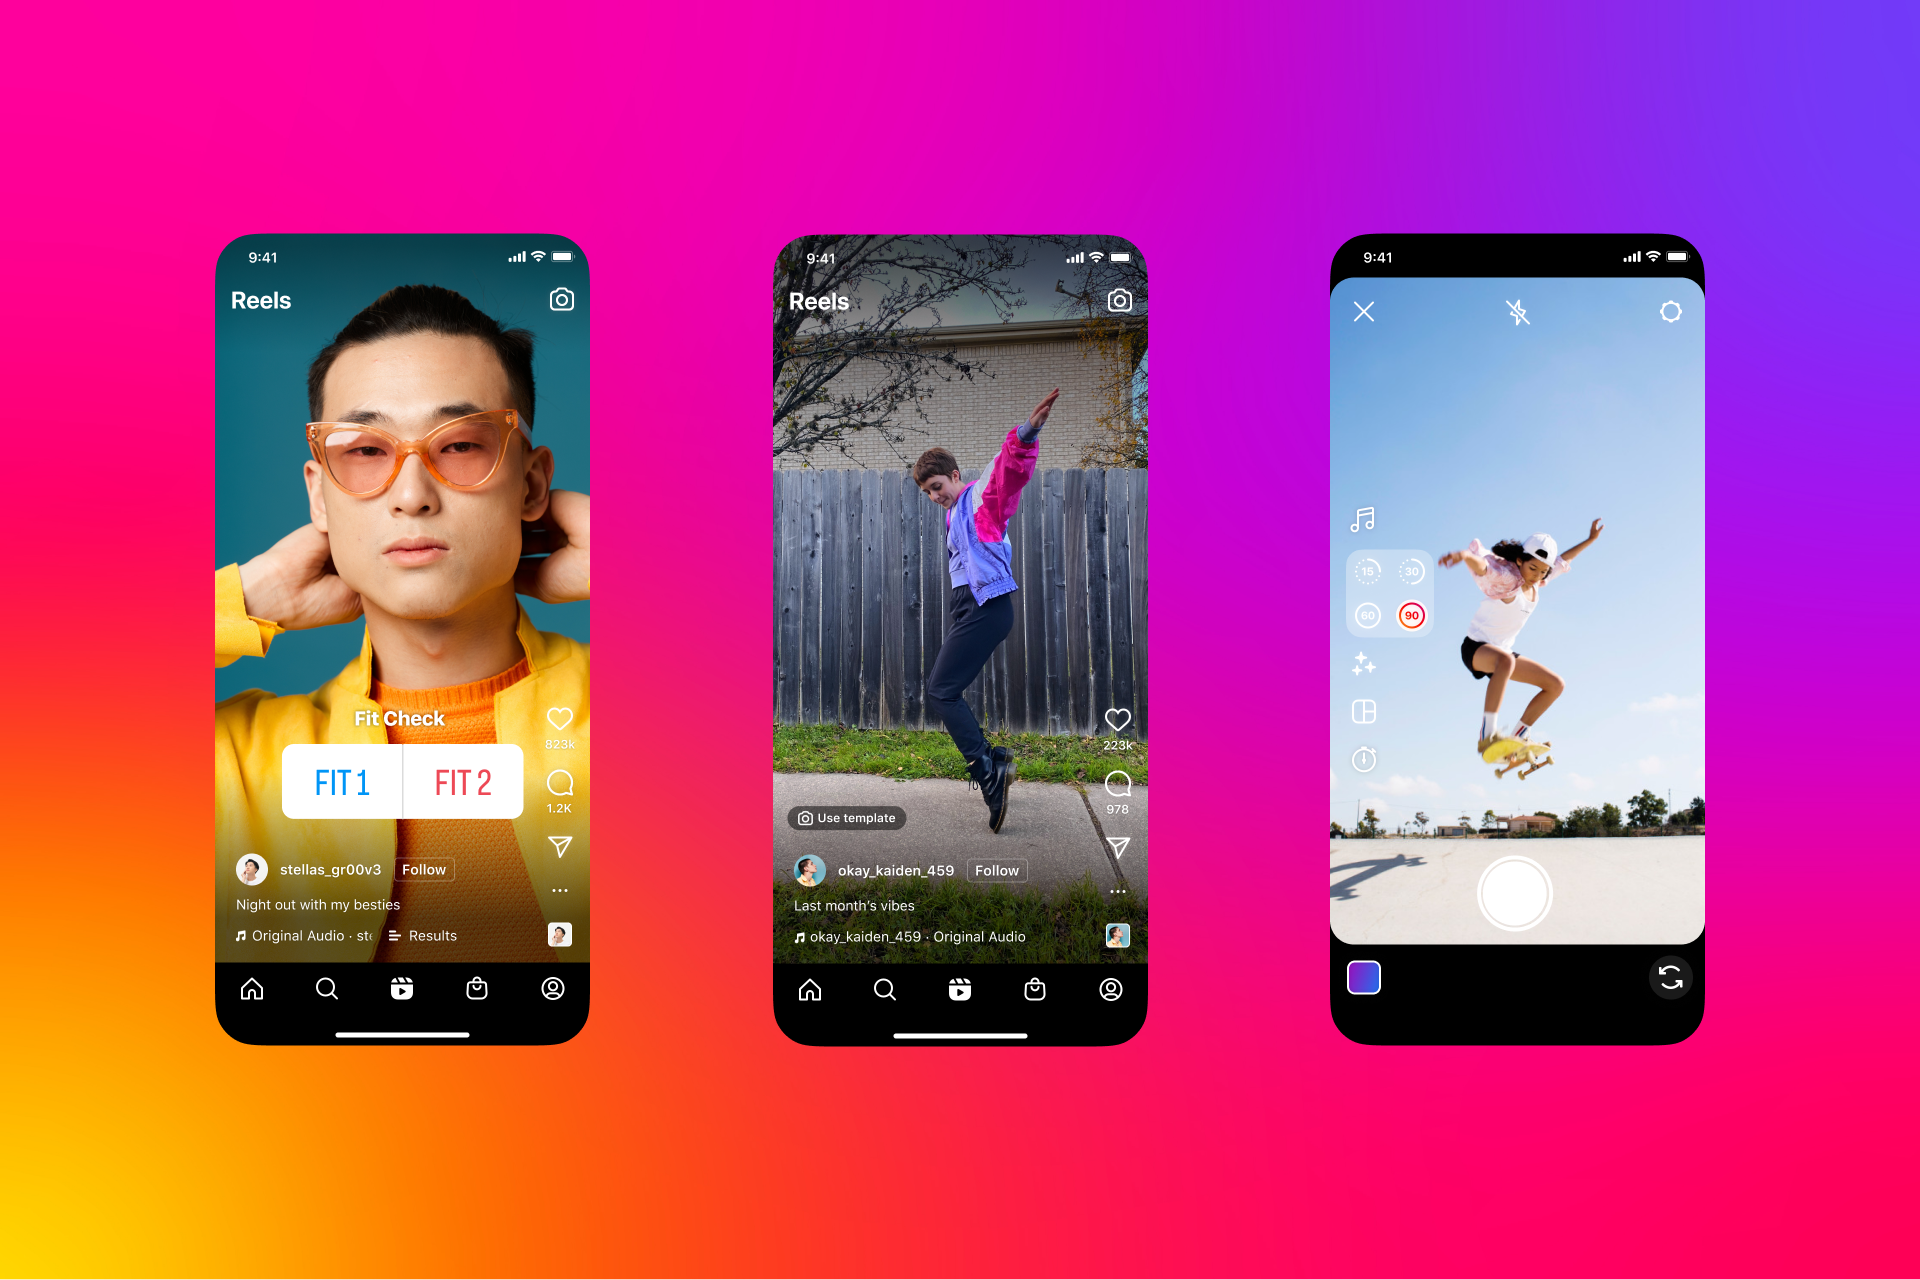 Chasing TikTok, Meta rolls out new Reels features and expands Instagram  Reels to 90 seconds | TechCrunch